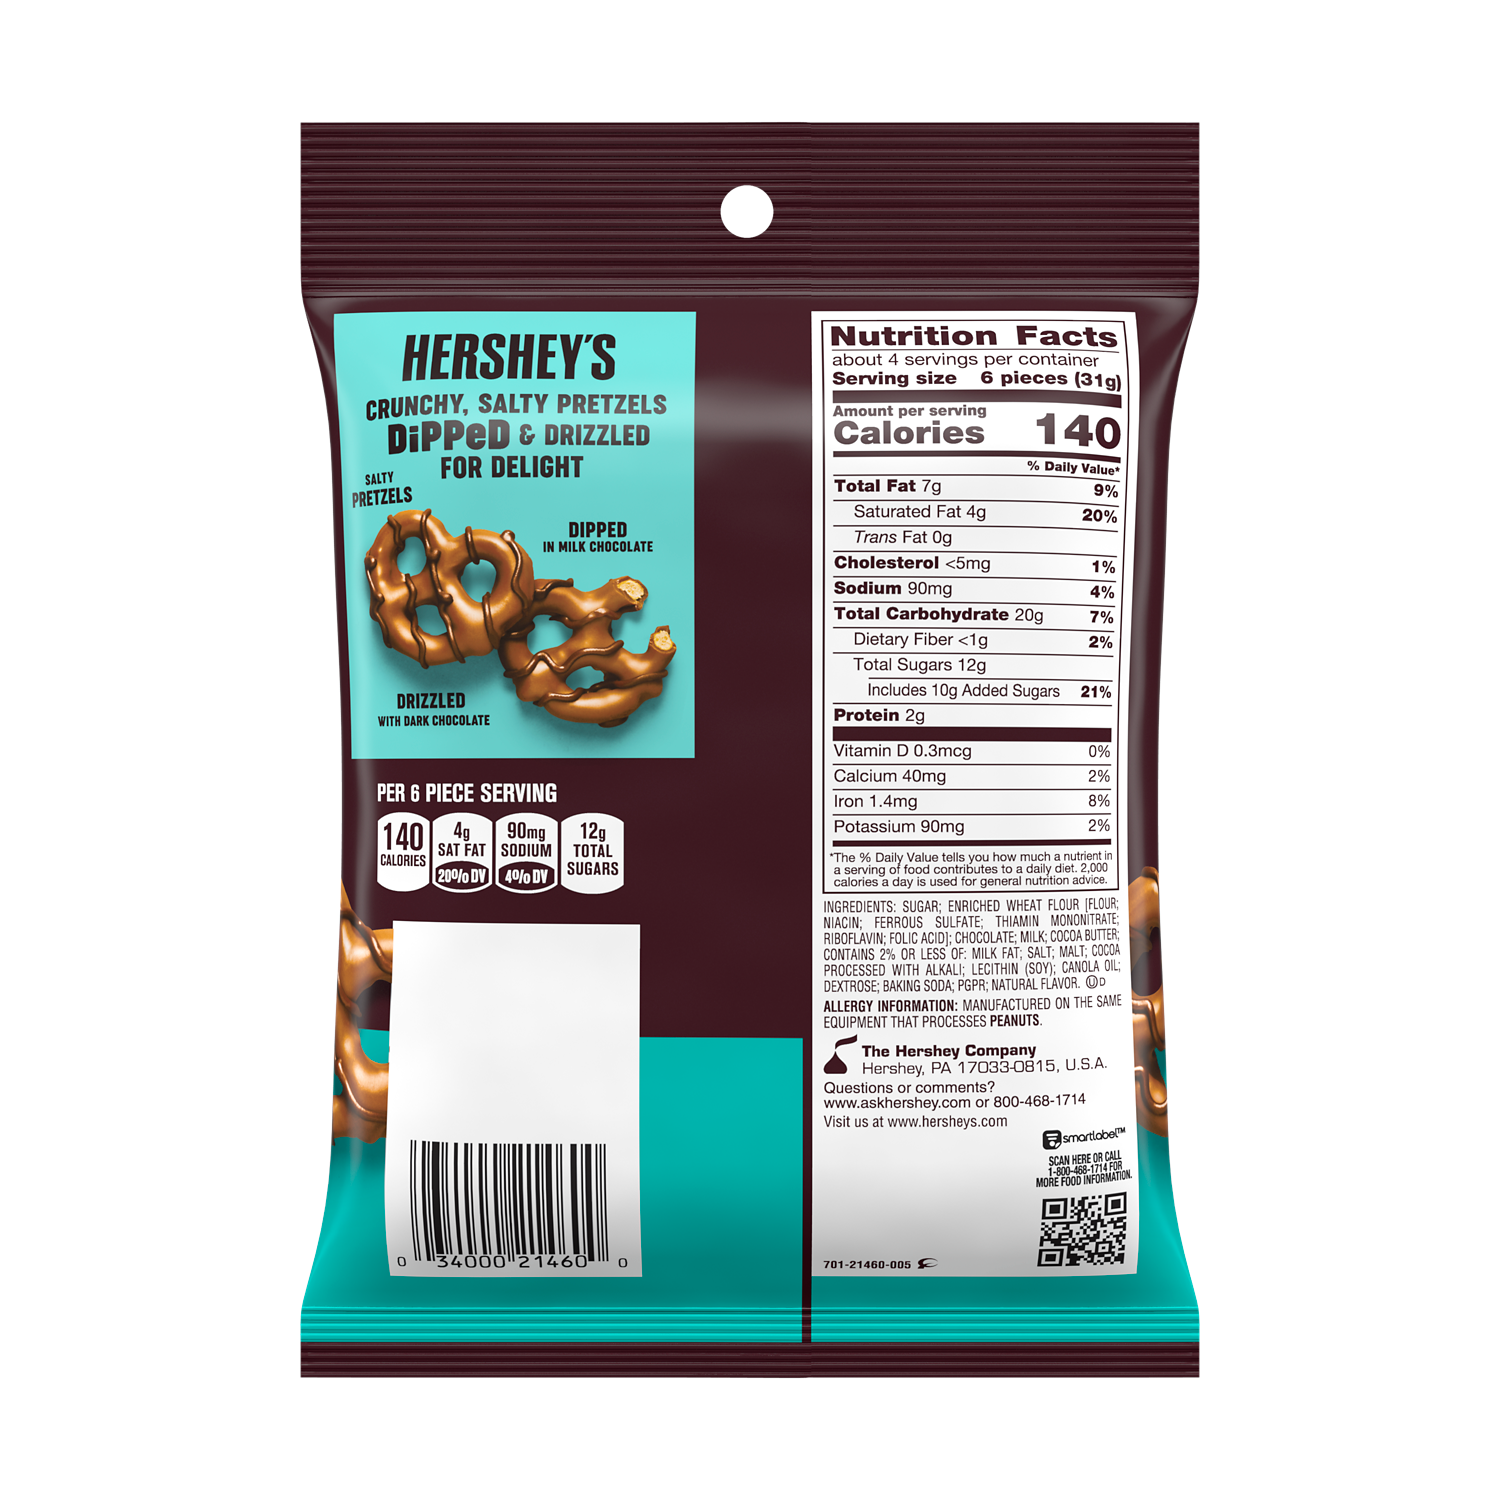 HERSHEY'S DiPPeD PreTzels Milk Chocolate Snack, 4.25 oz bag - Back of Package